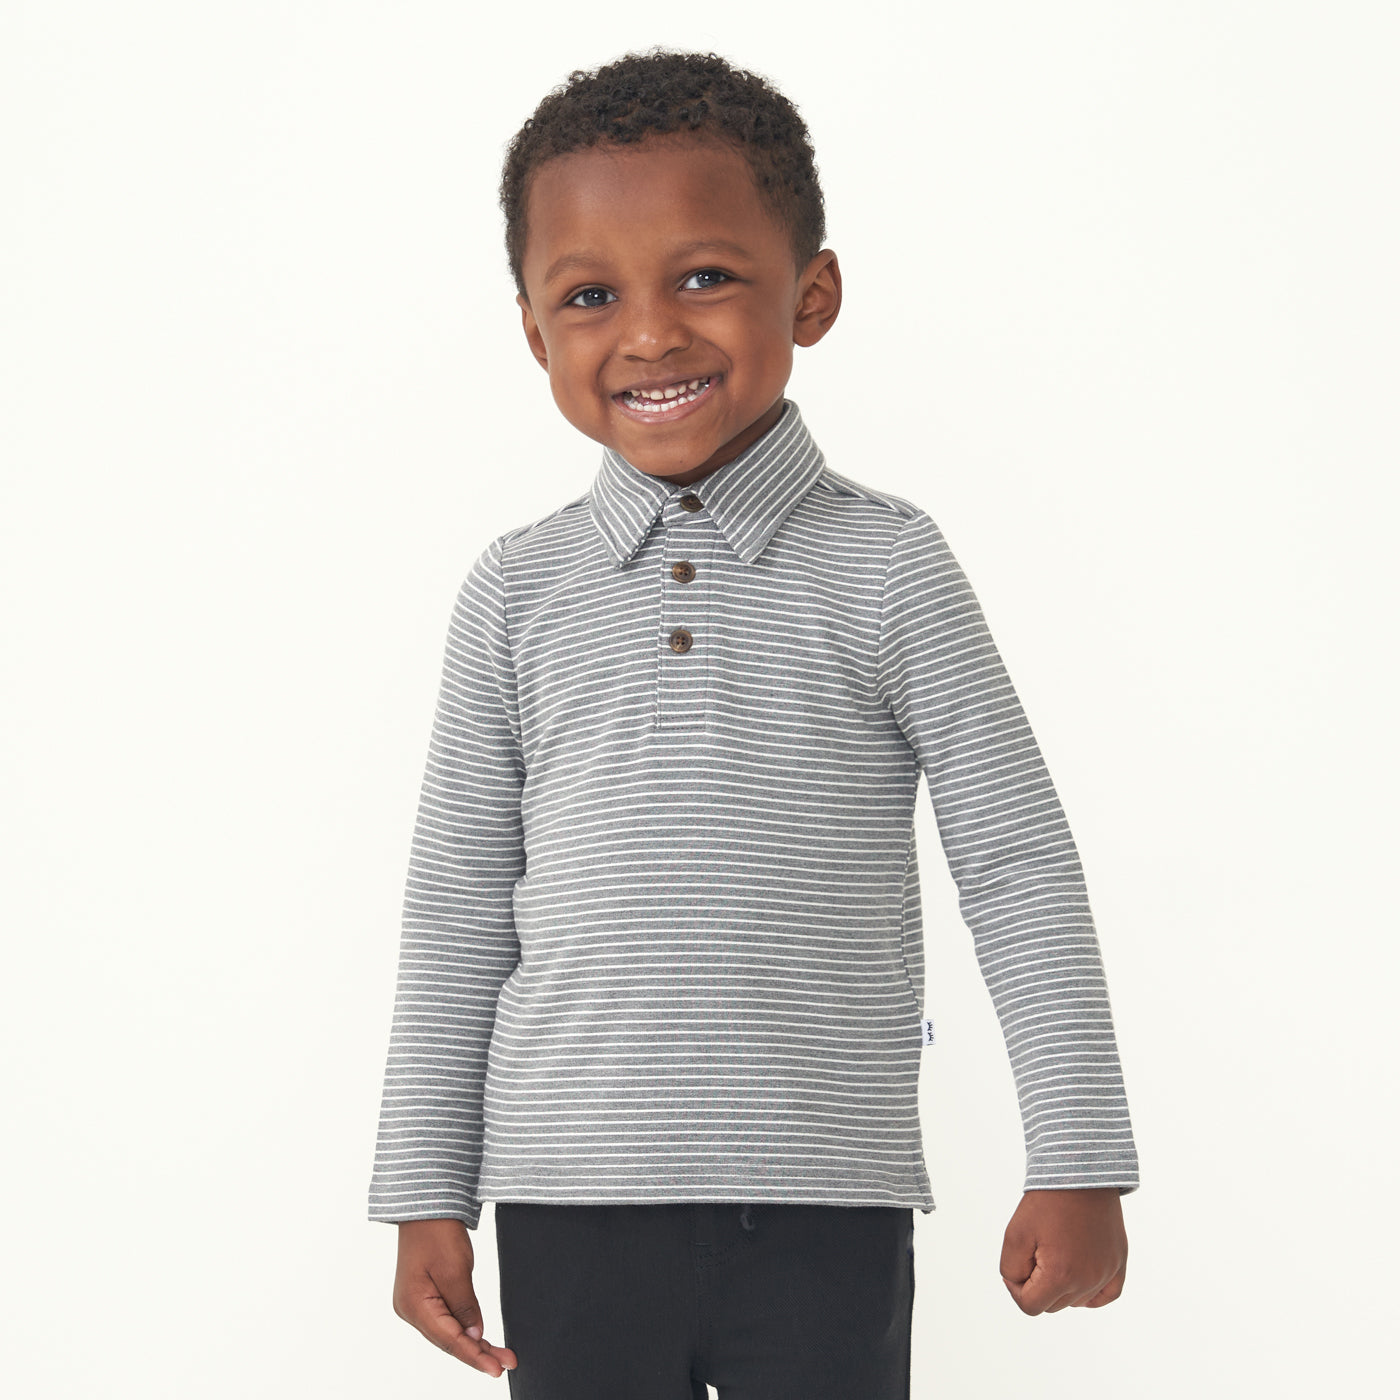 Child wearing a Heather Charcoal stripes polo shirt paired with Black joggers